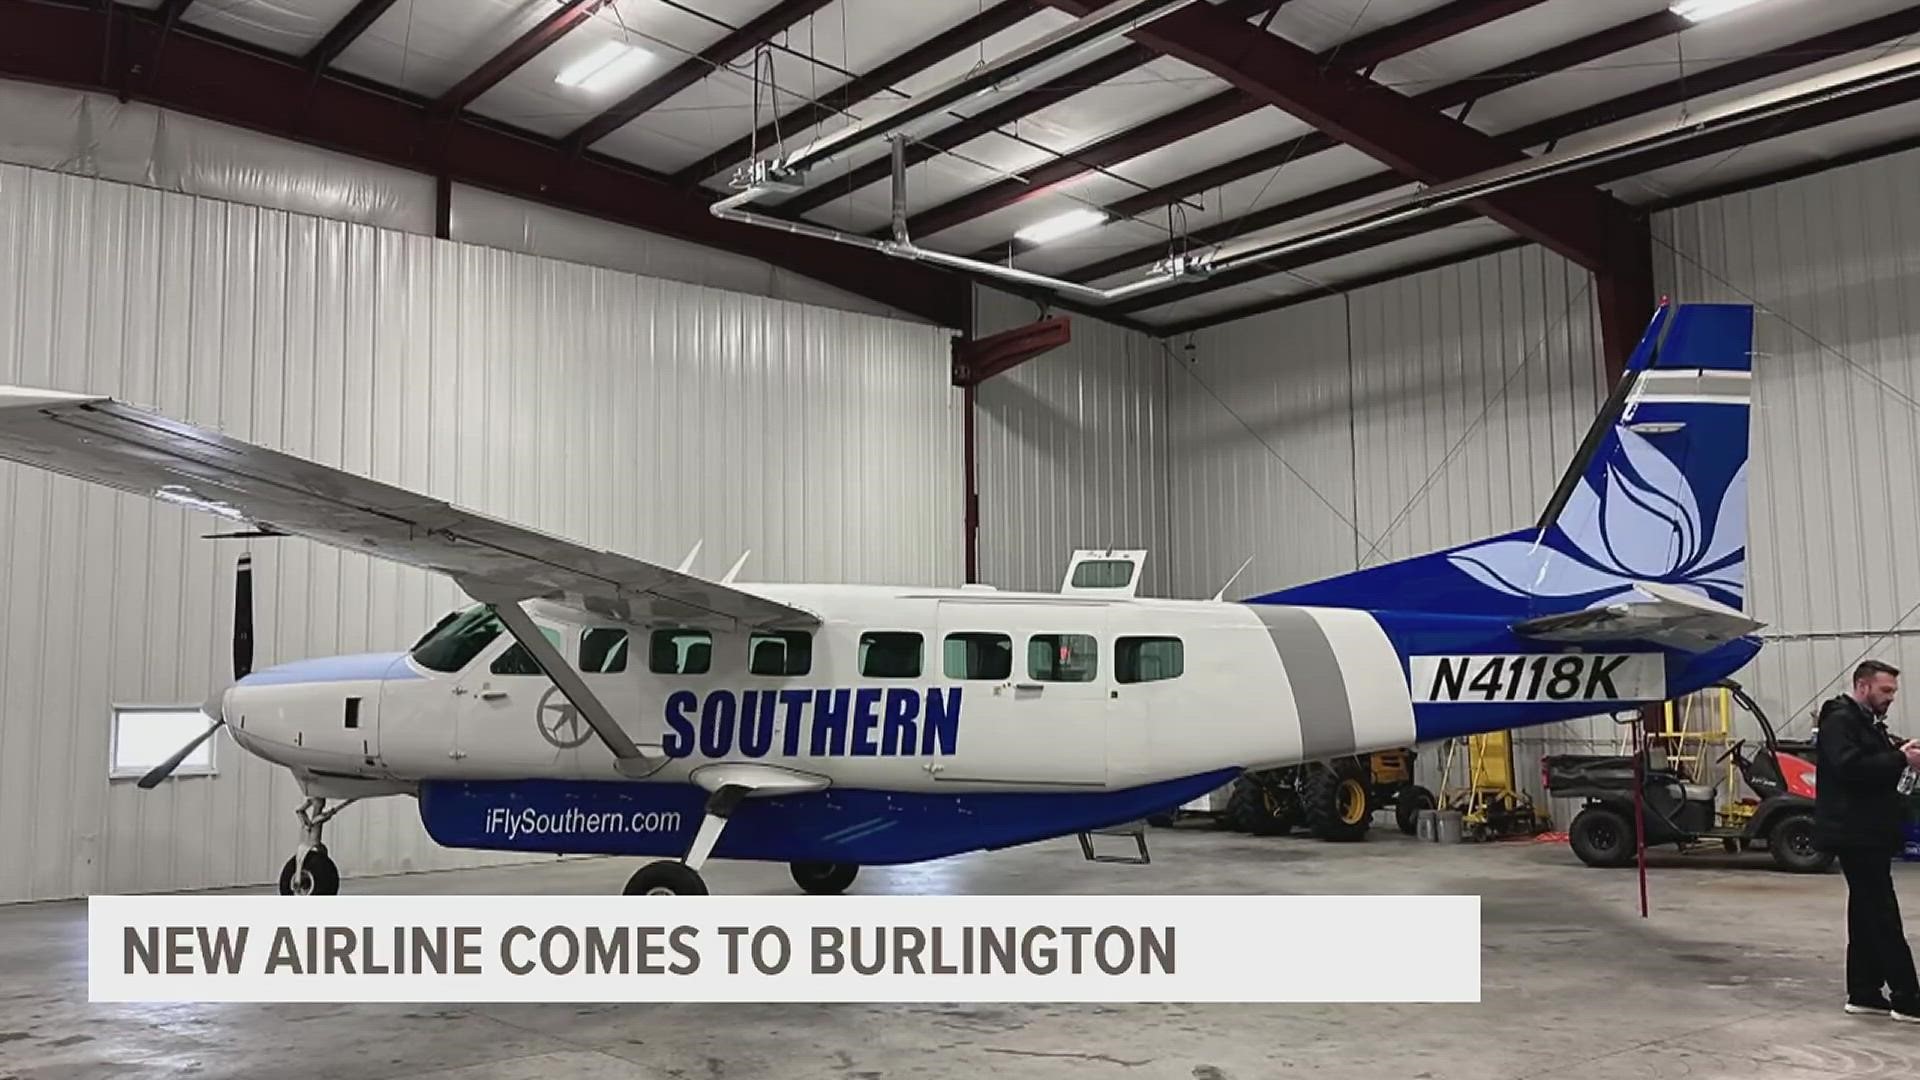 Southern Airways will be flying daily to Chicago and St. Louis out of Southeast Iowa Regional Airport beginning April 1.